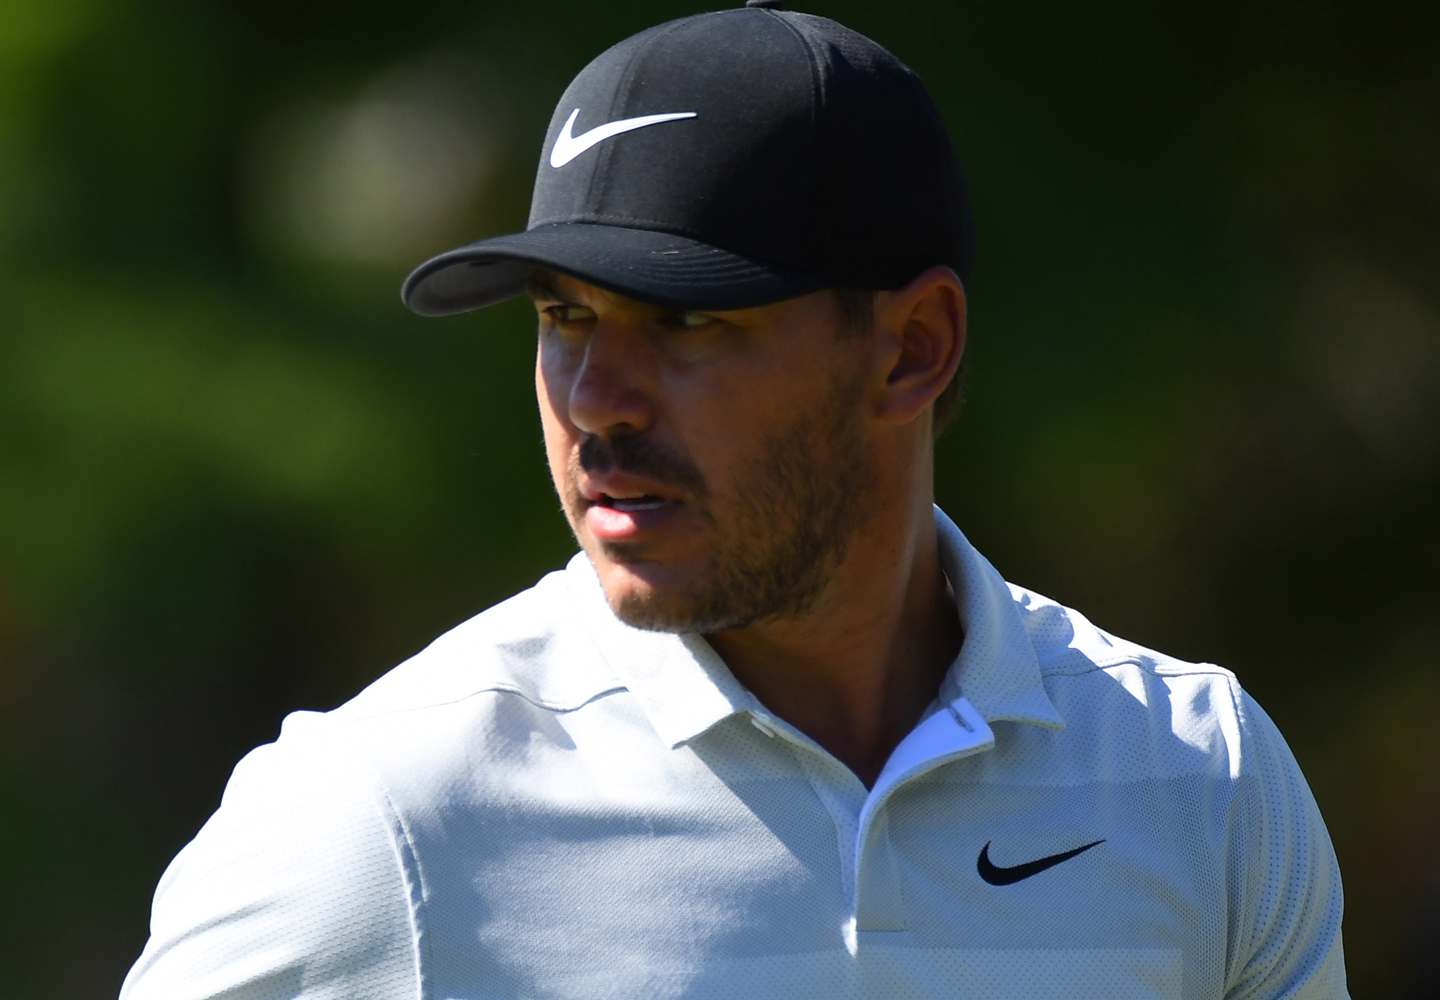 Brooks Koepka leads by 4 at CJ Cup, improves chances to move to No. 1